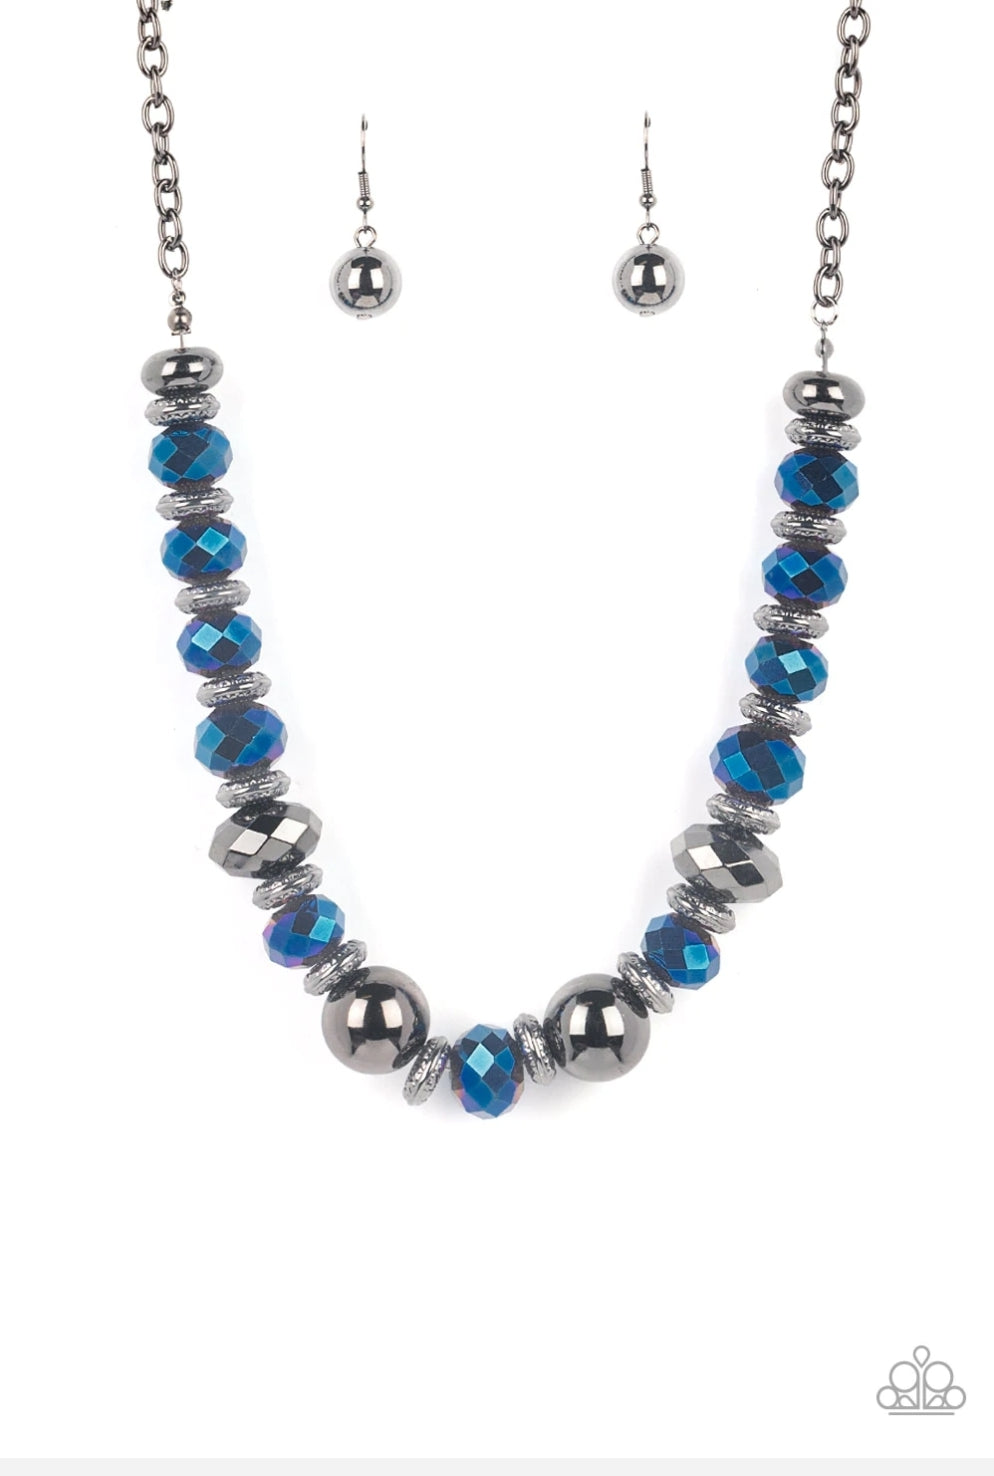 Paparazzi Interstellar Influencer-Blue Necklace May 2022 Life of the Party EXCLUSIVE